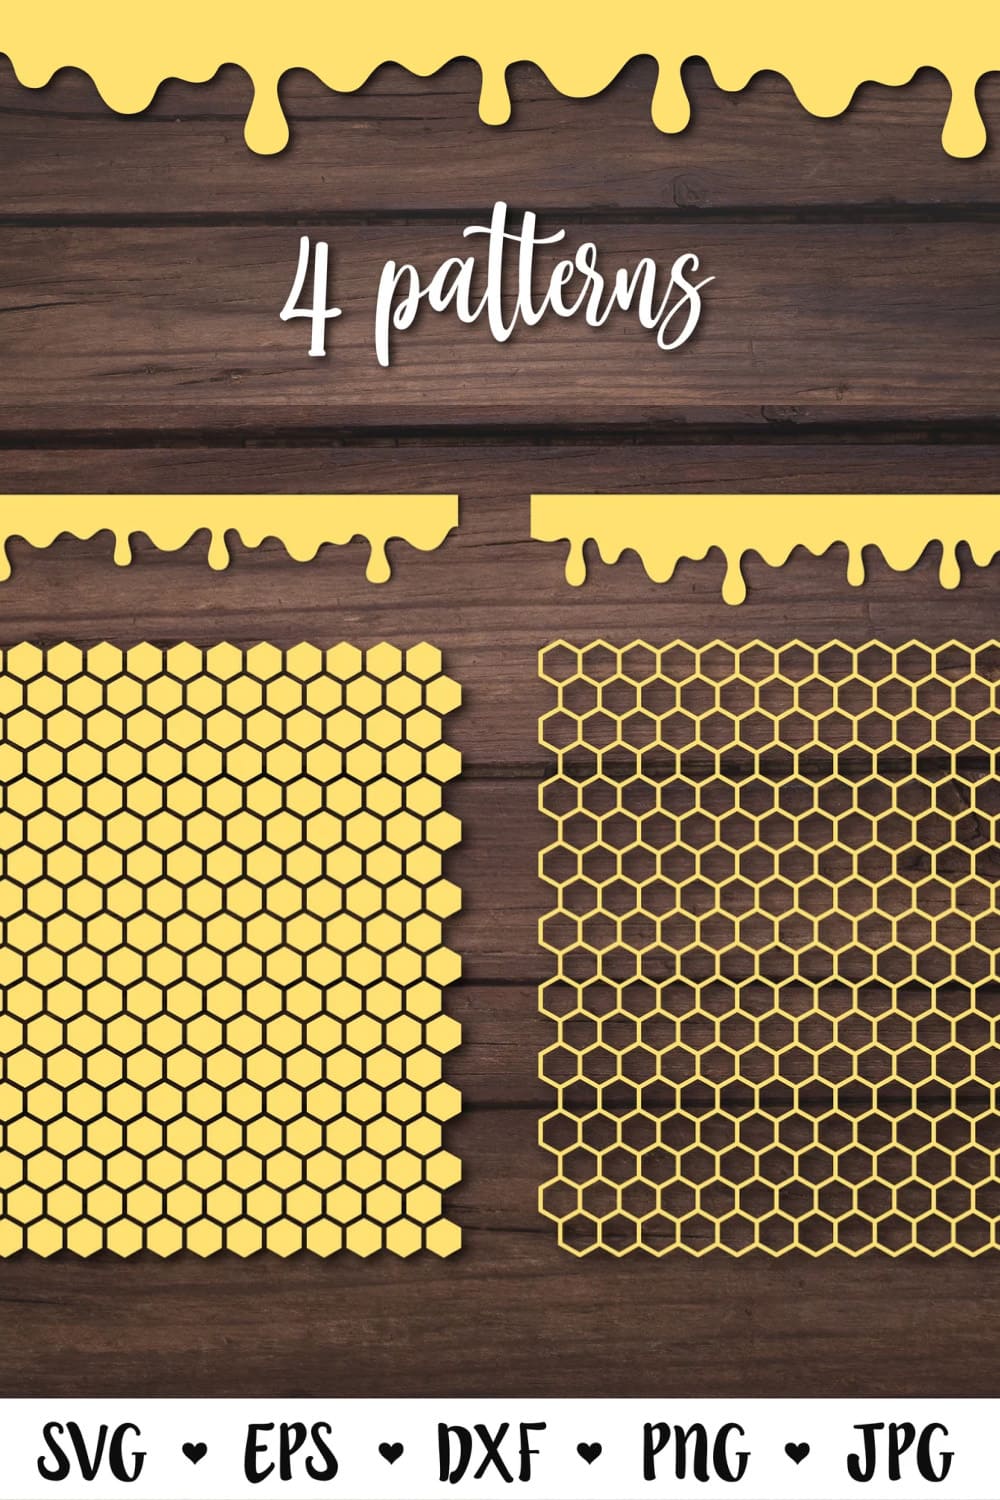 Four patterns of honeycombs on a wooden background.